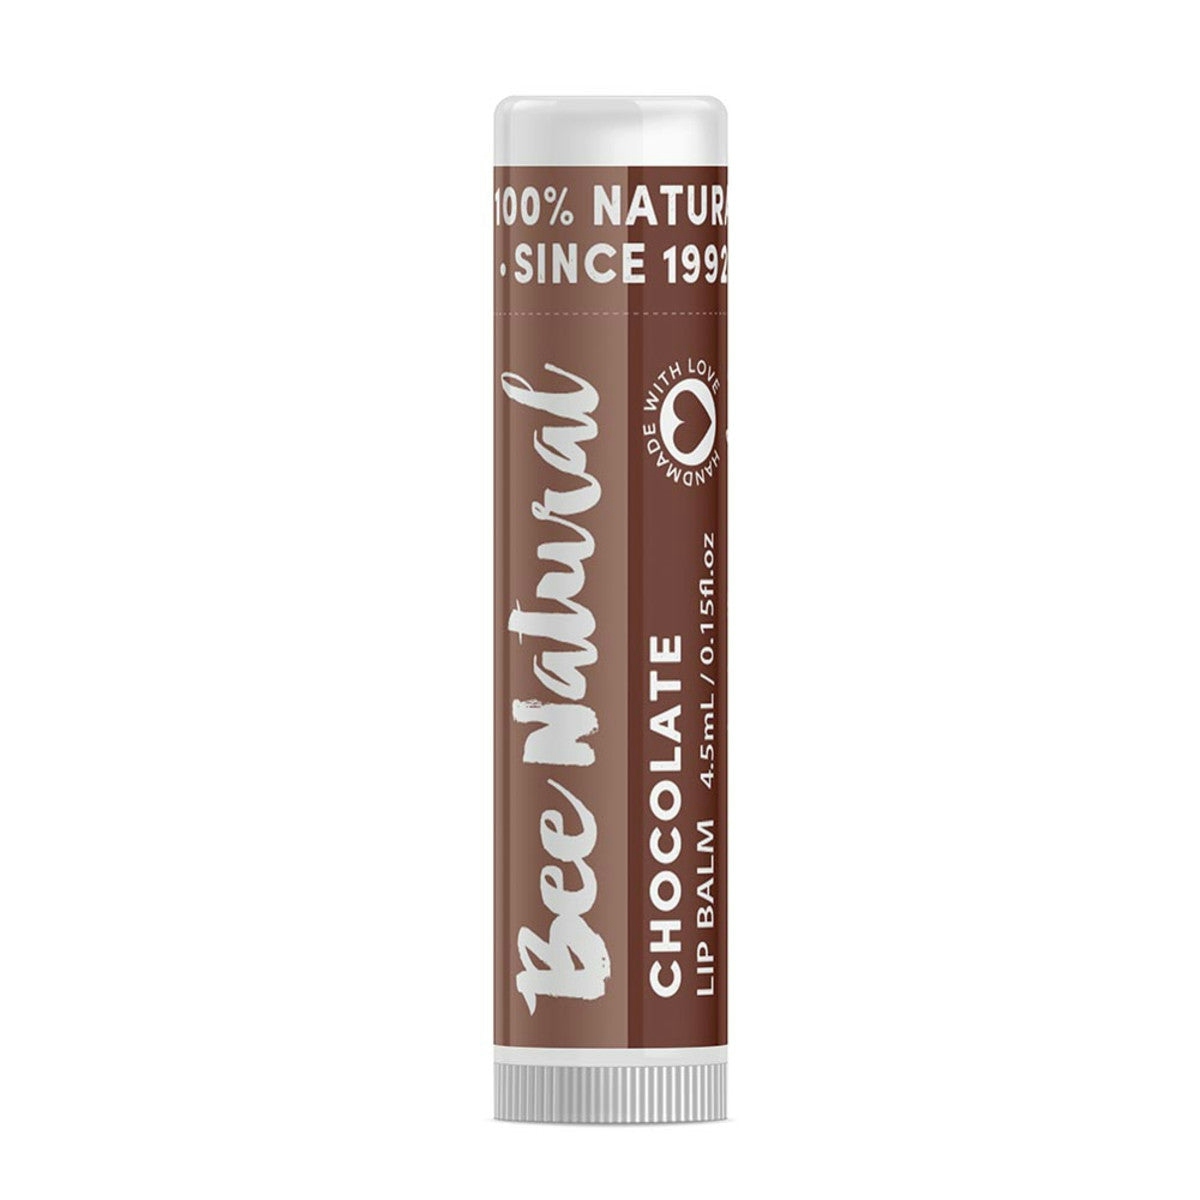 image of Bee Natural Lip Balm Stick chocolate 4.5ml on white background